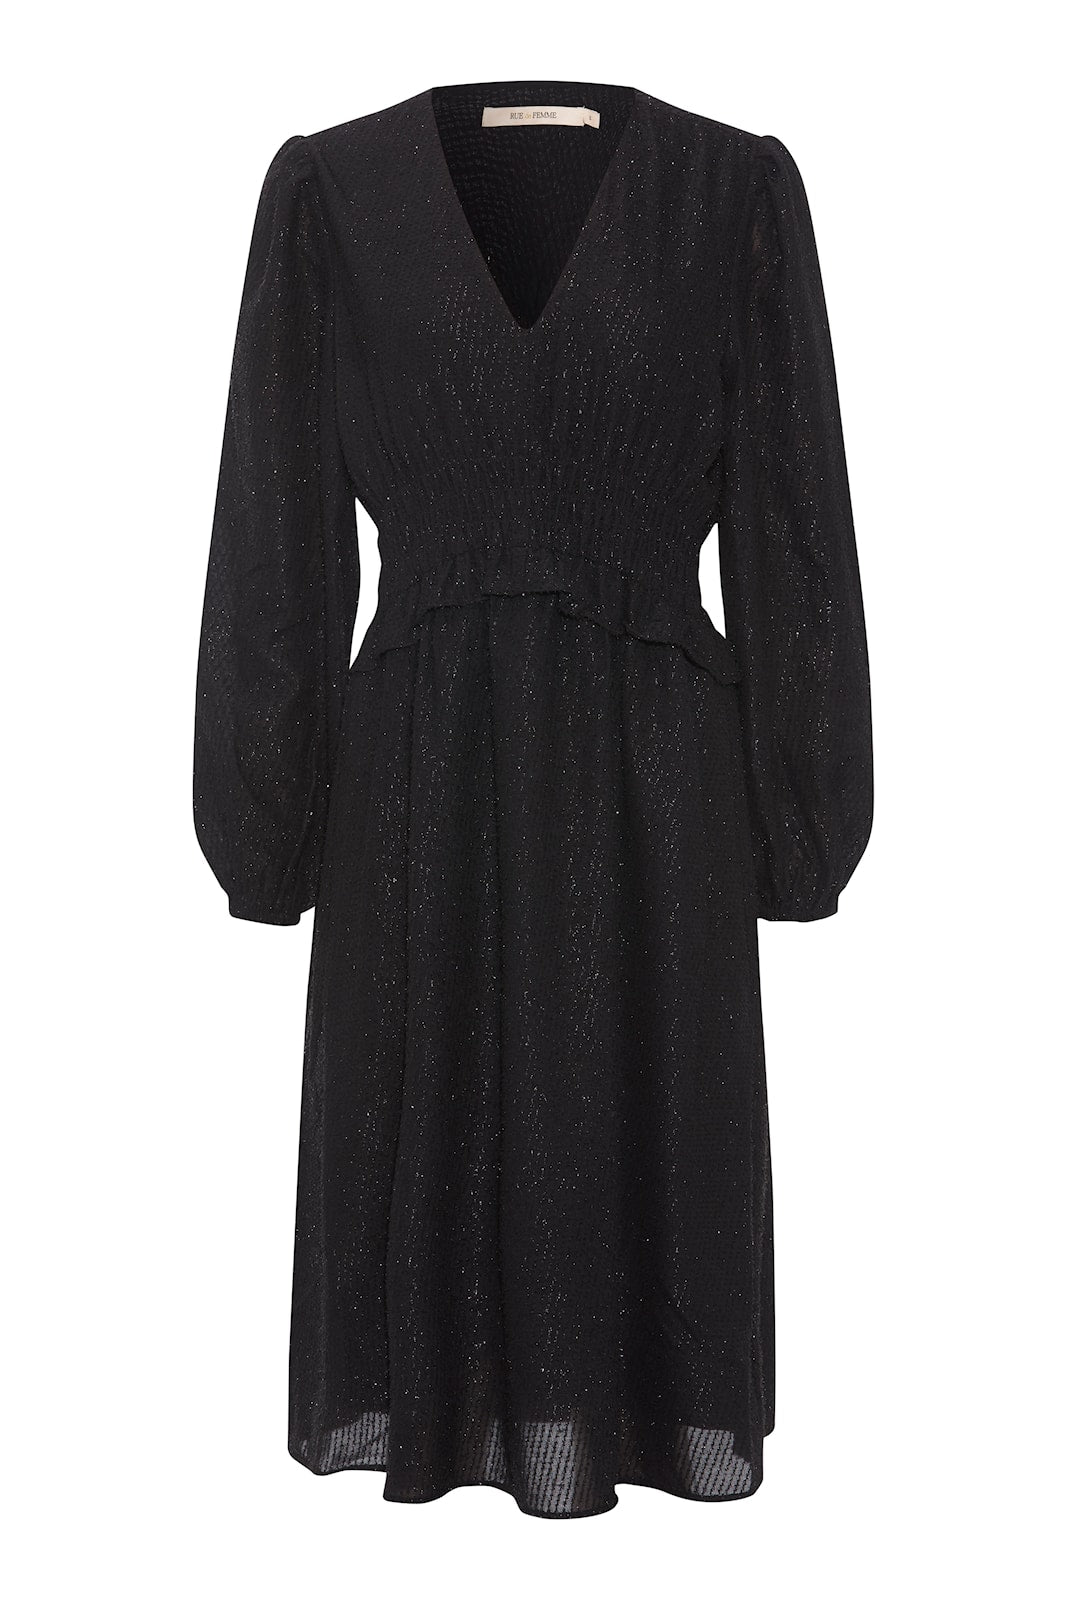 Rue De Femme Cambria Black party dress with fluffy shimmer